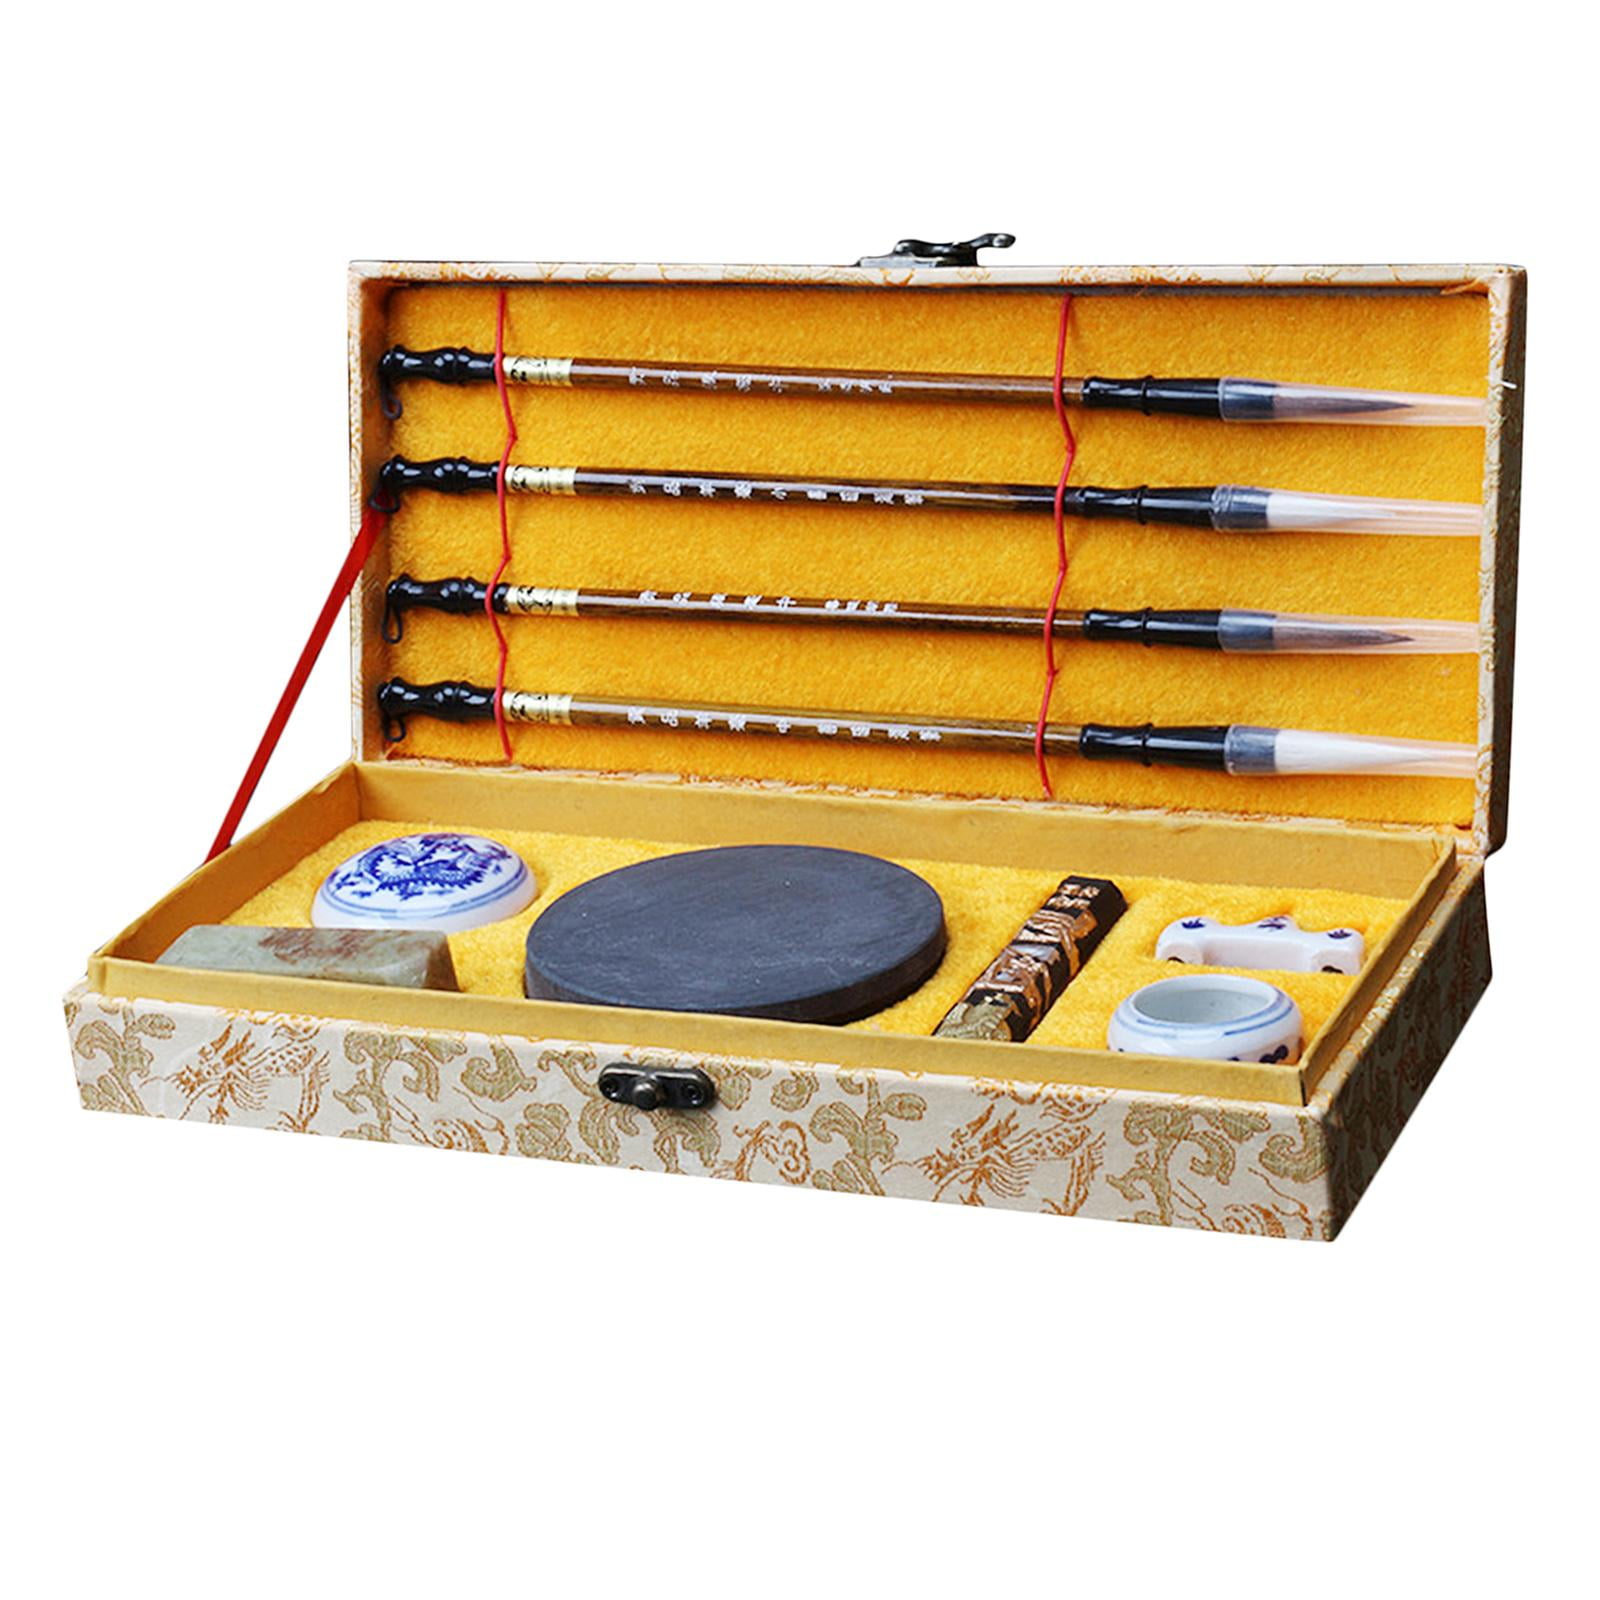 CA Society Chinese Calligraphy Set, Japanese Calligraphy Brush Gift Set,  Brush Calligraphy Ink, Water Writing Cloth, 9 Pcs for Beginners